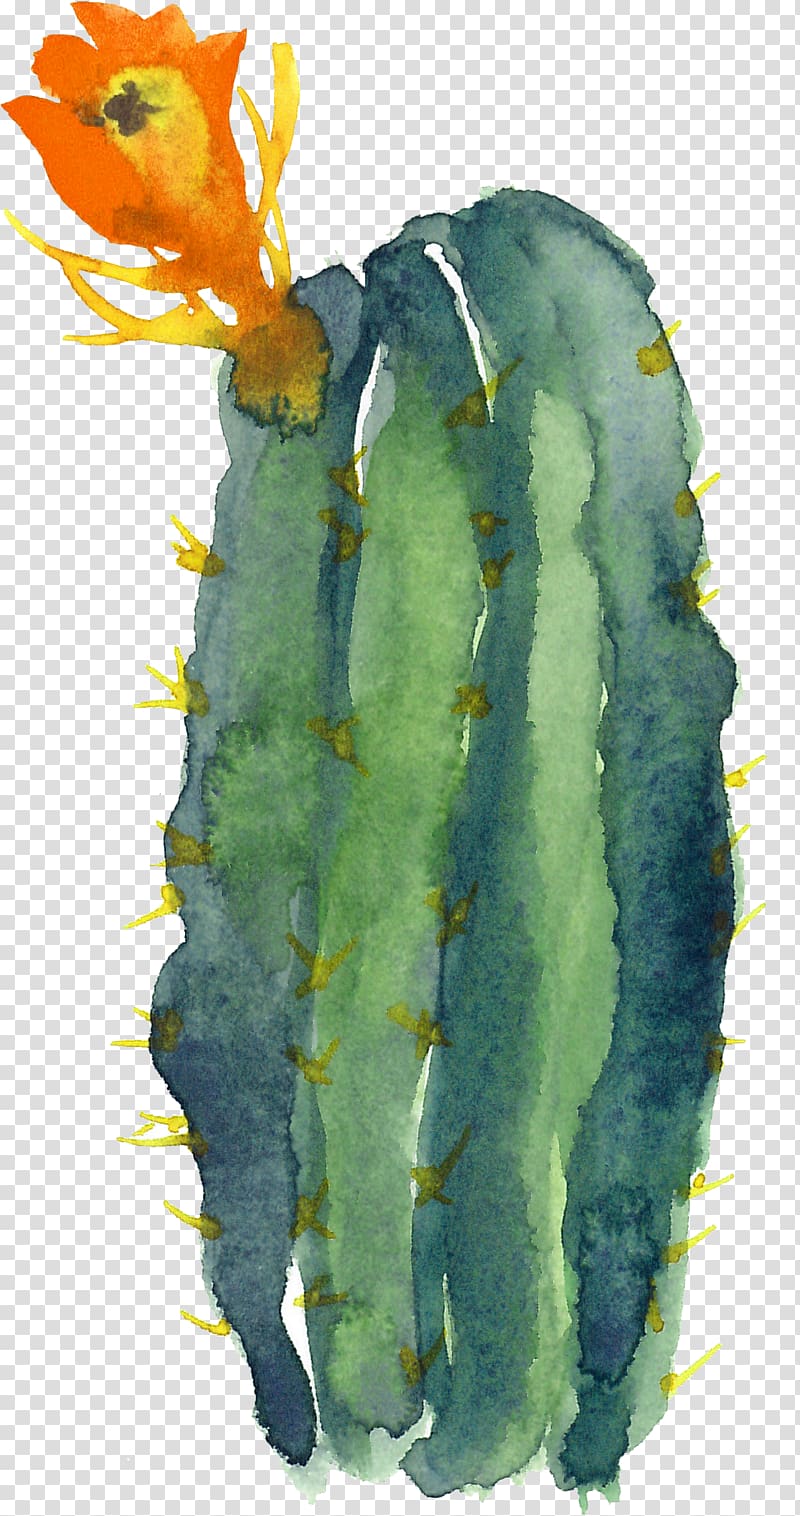 green cactus plant illustration, Cactaceae Modern Watercolor: A Playful and Contemporary Exploration of Watercolor Painting, cactus transparent background PNG clipart